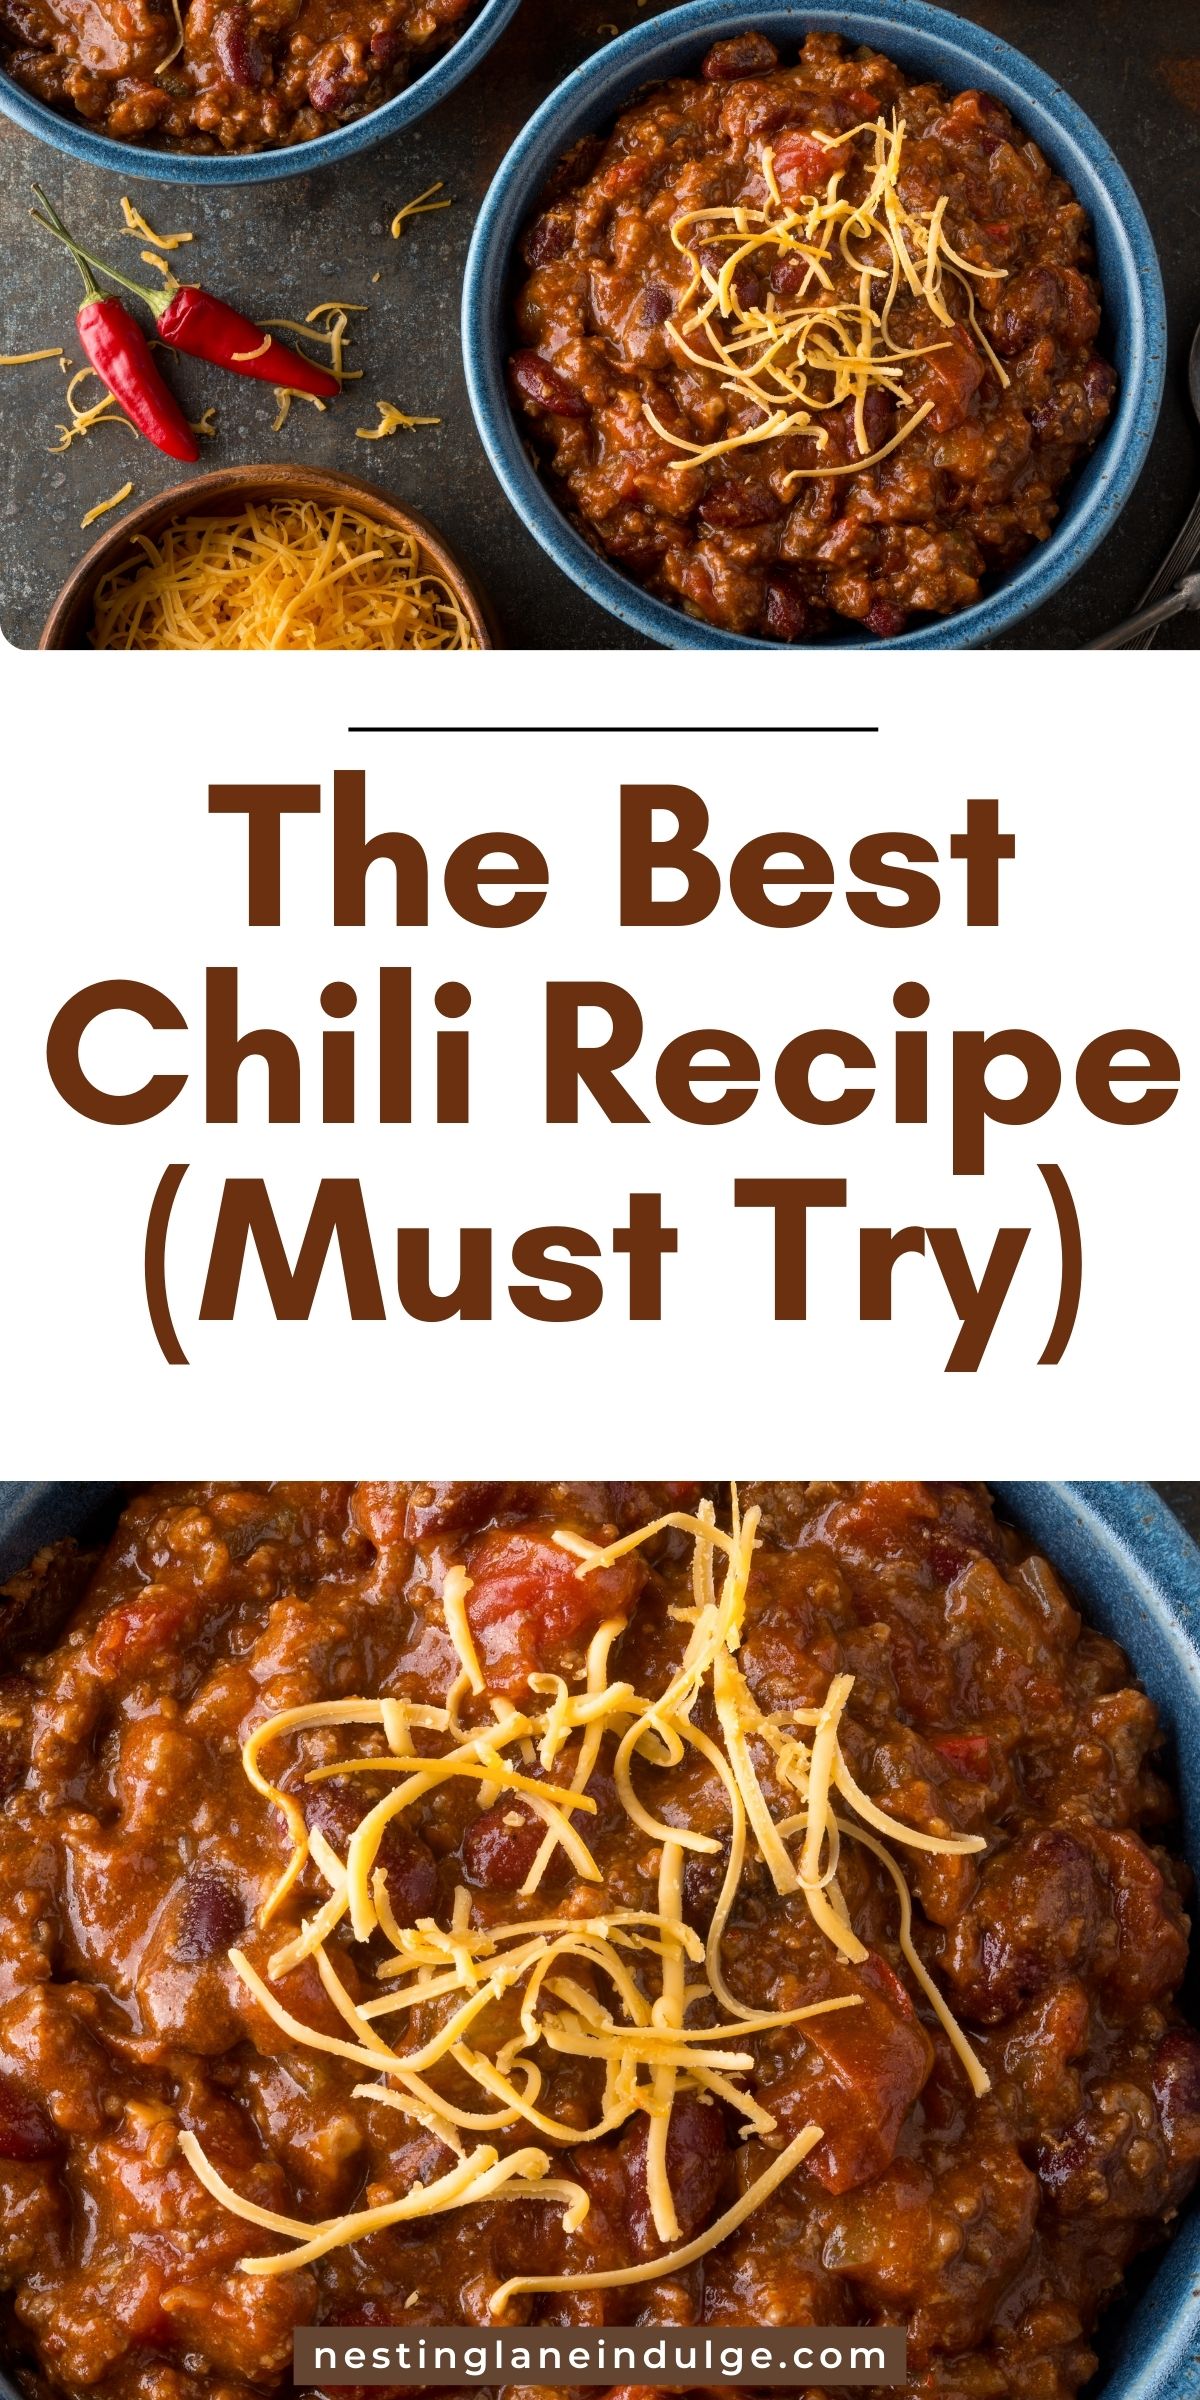 Promotional image for "The Best Chili Recipe (Must Try)" featuring a delicious bowl of chili with cheese on top, website name at the bottom, against a dark background with chili peppers and herbs.